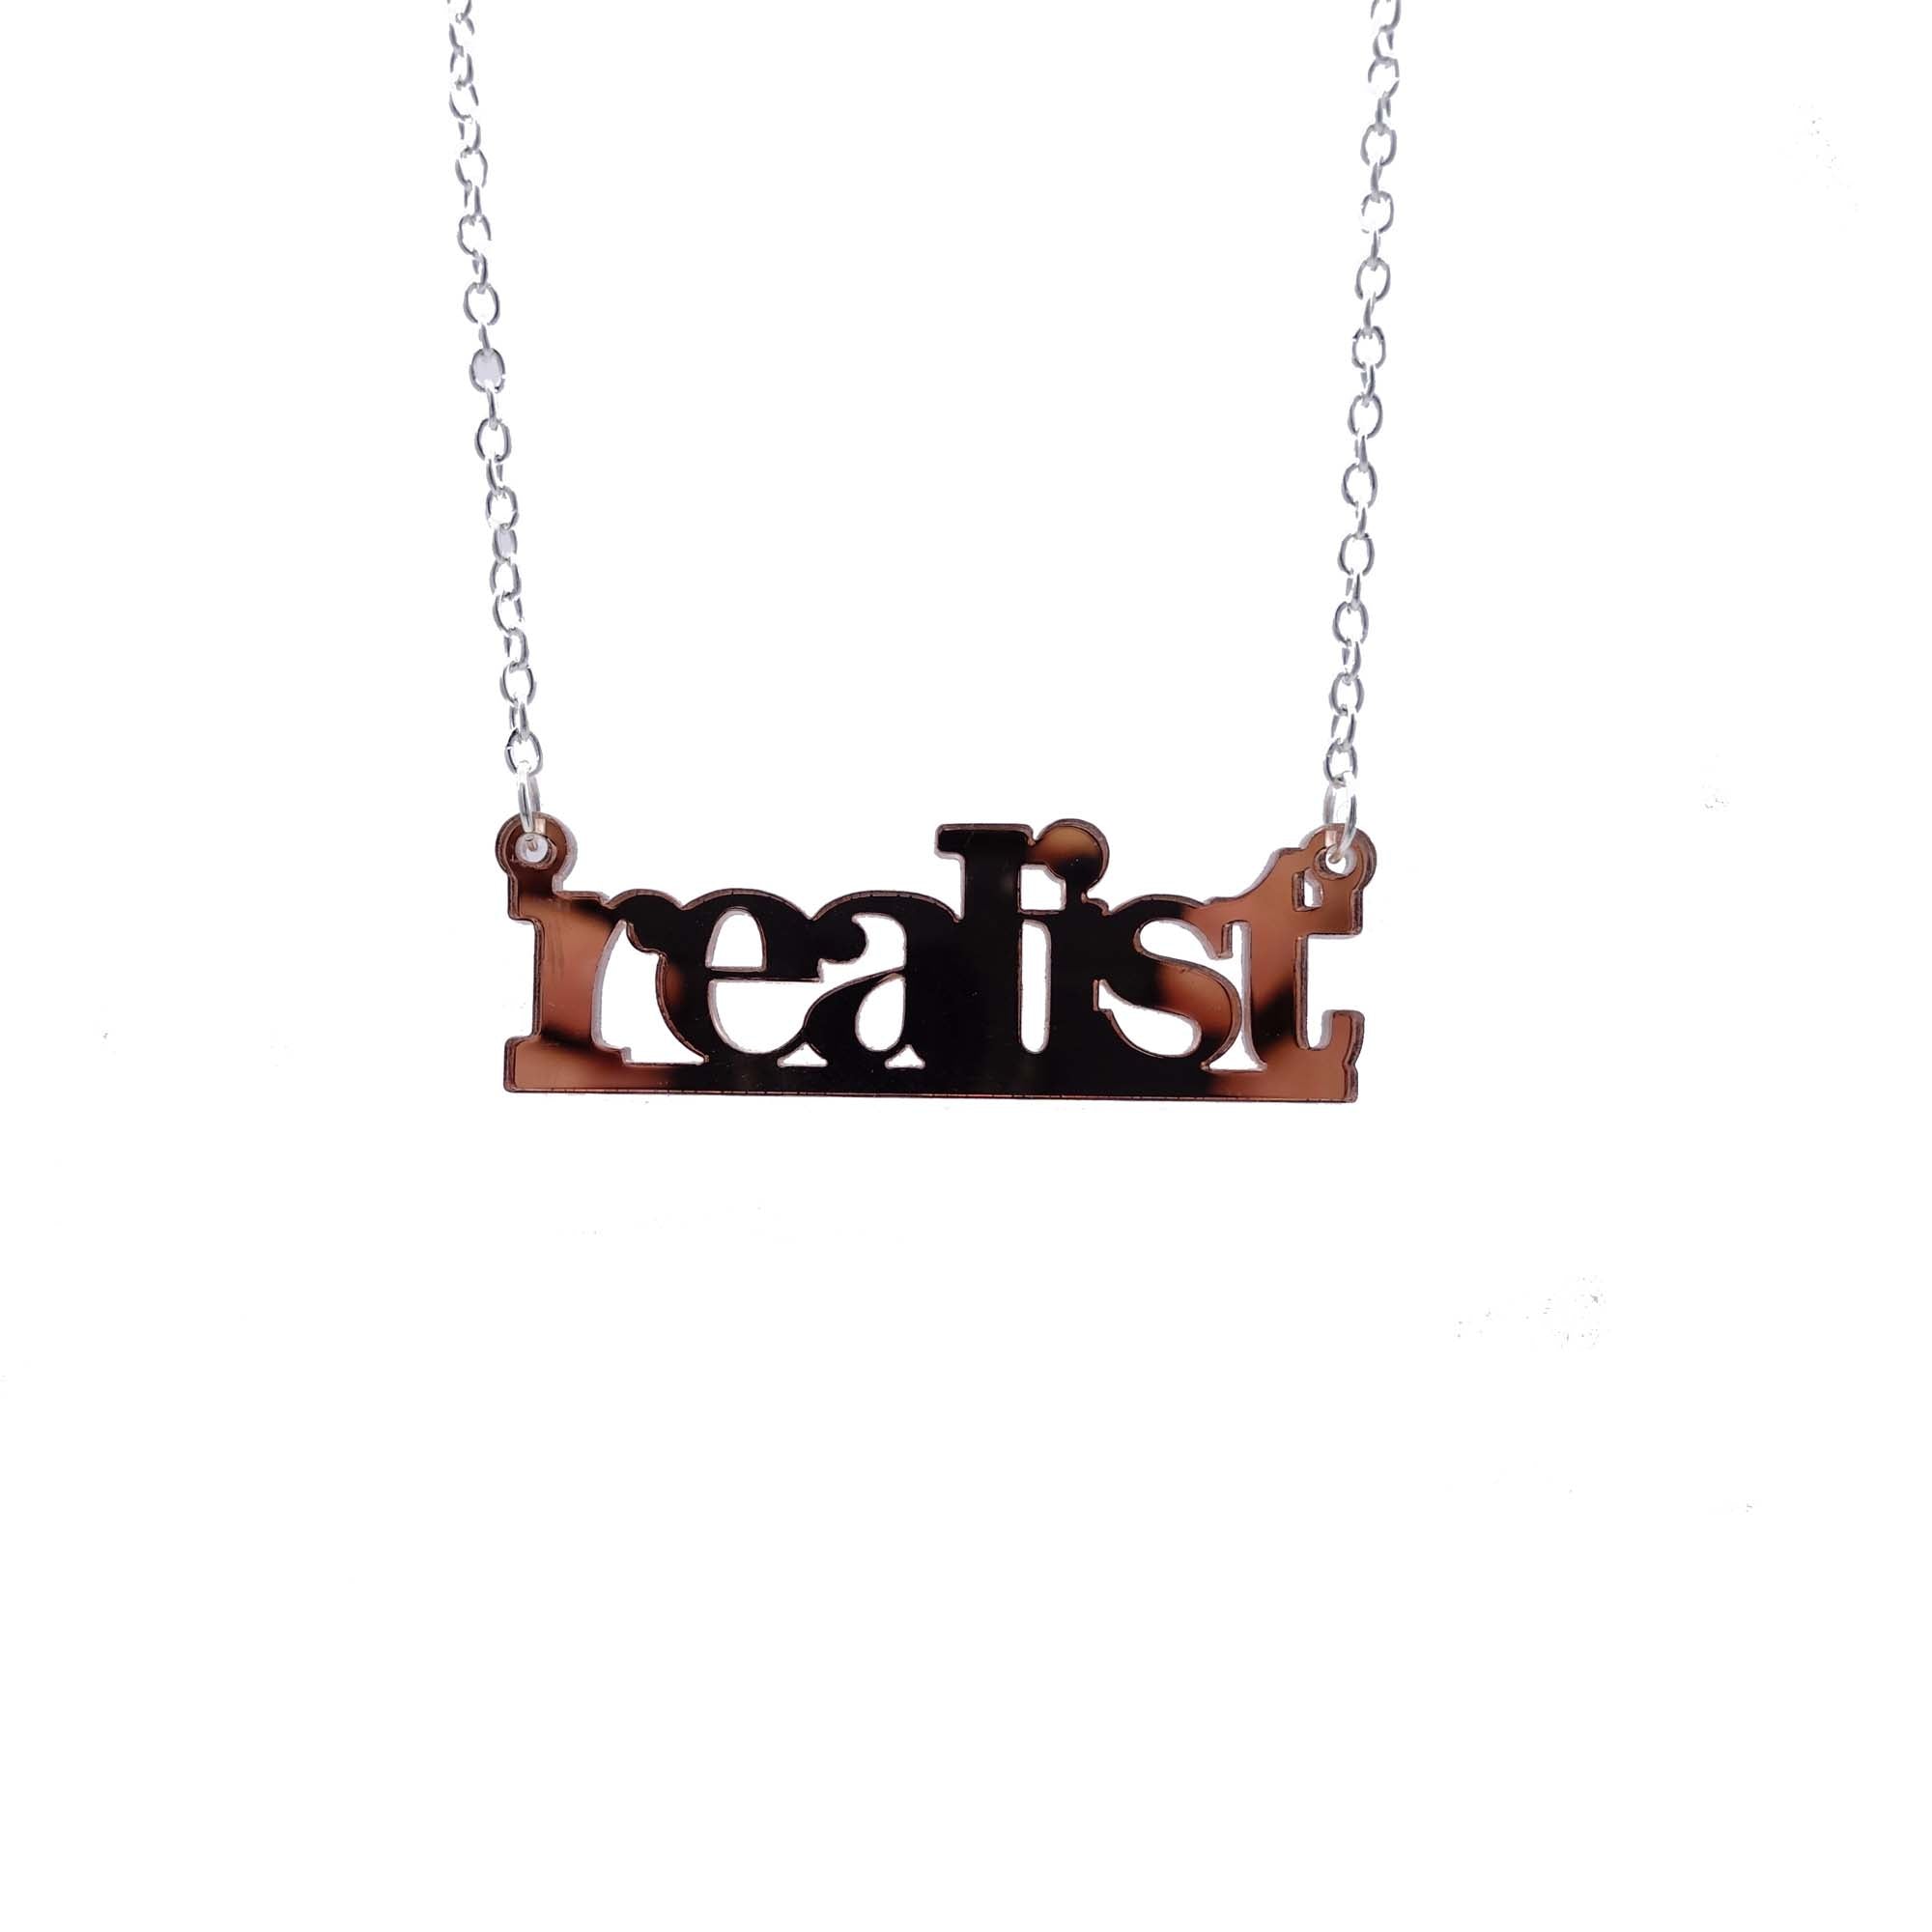 rose gold mirror realist literary necklace 